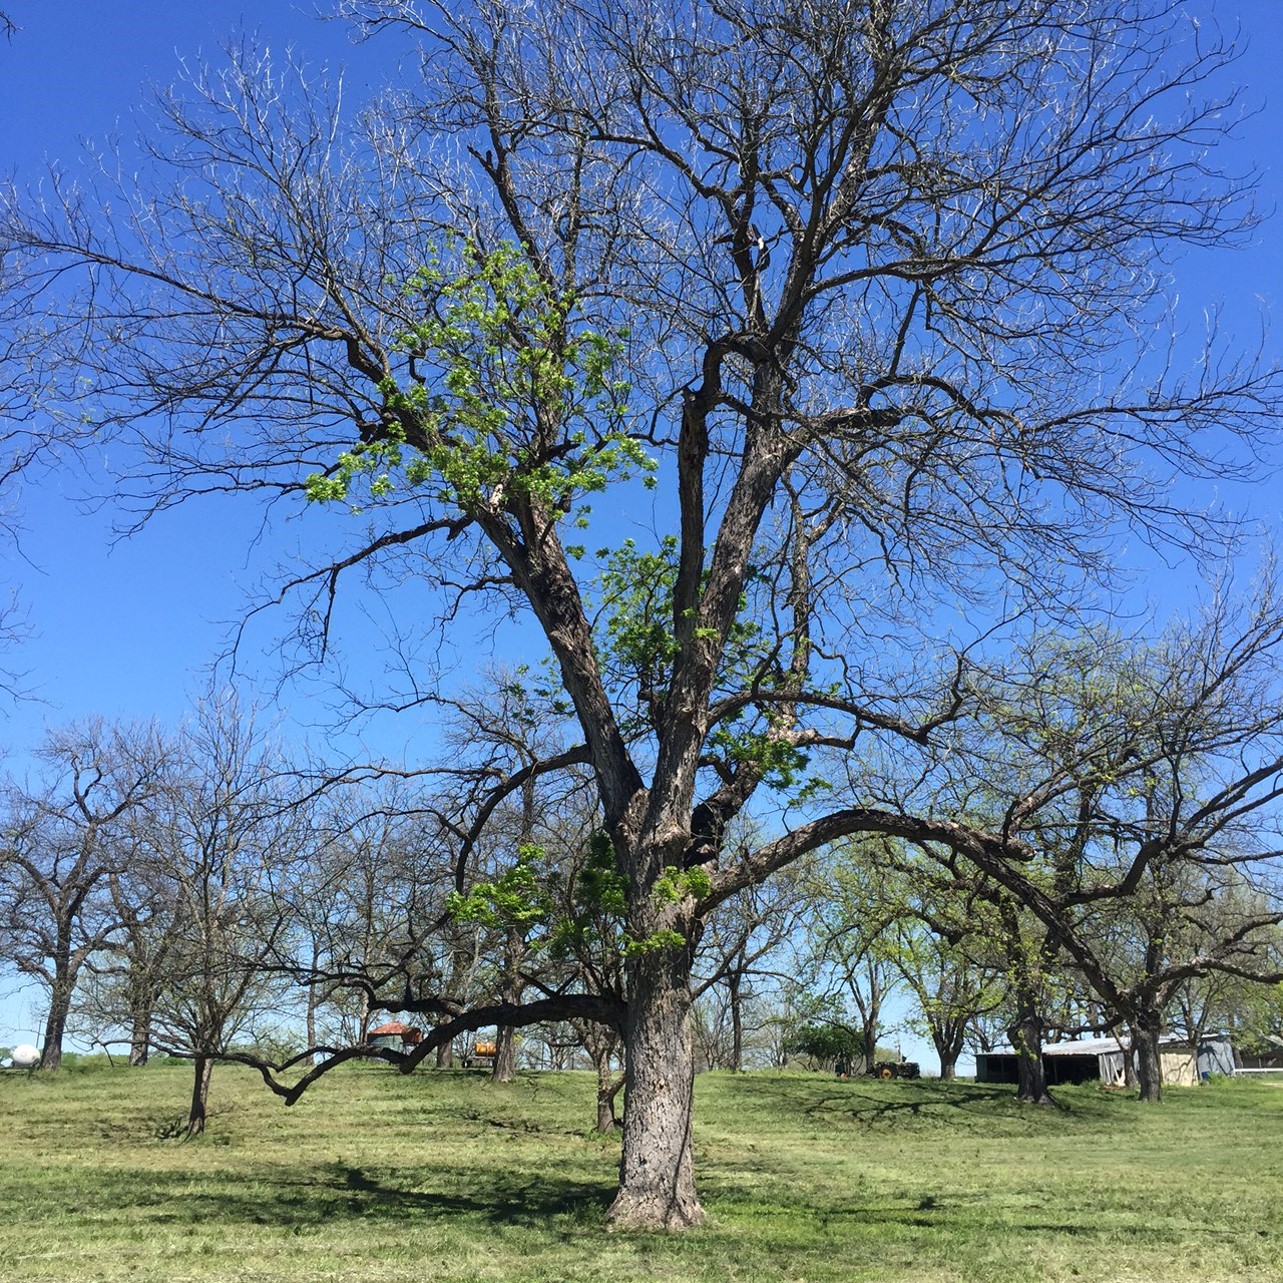 A pecan tree with bunches of green leaves scattered about its canopy. Growers should remove this underperforming tree.